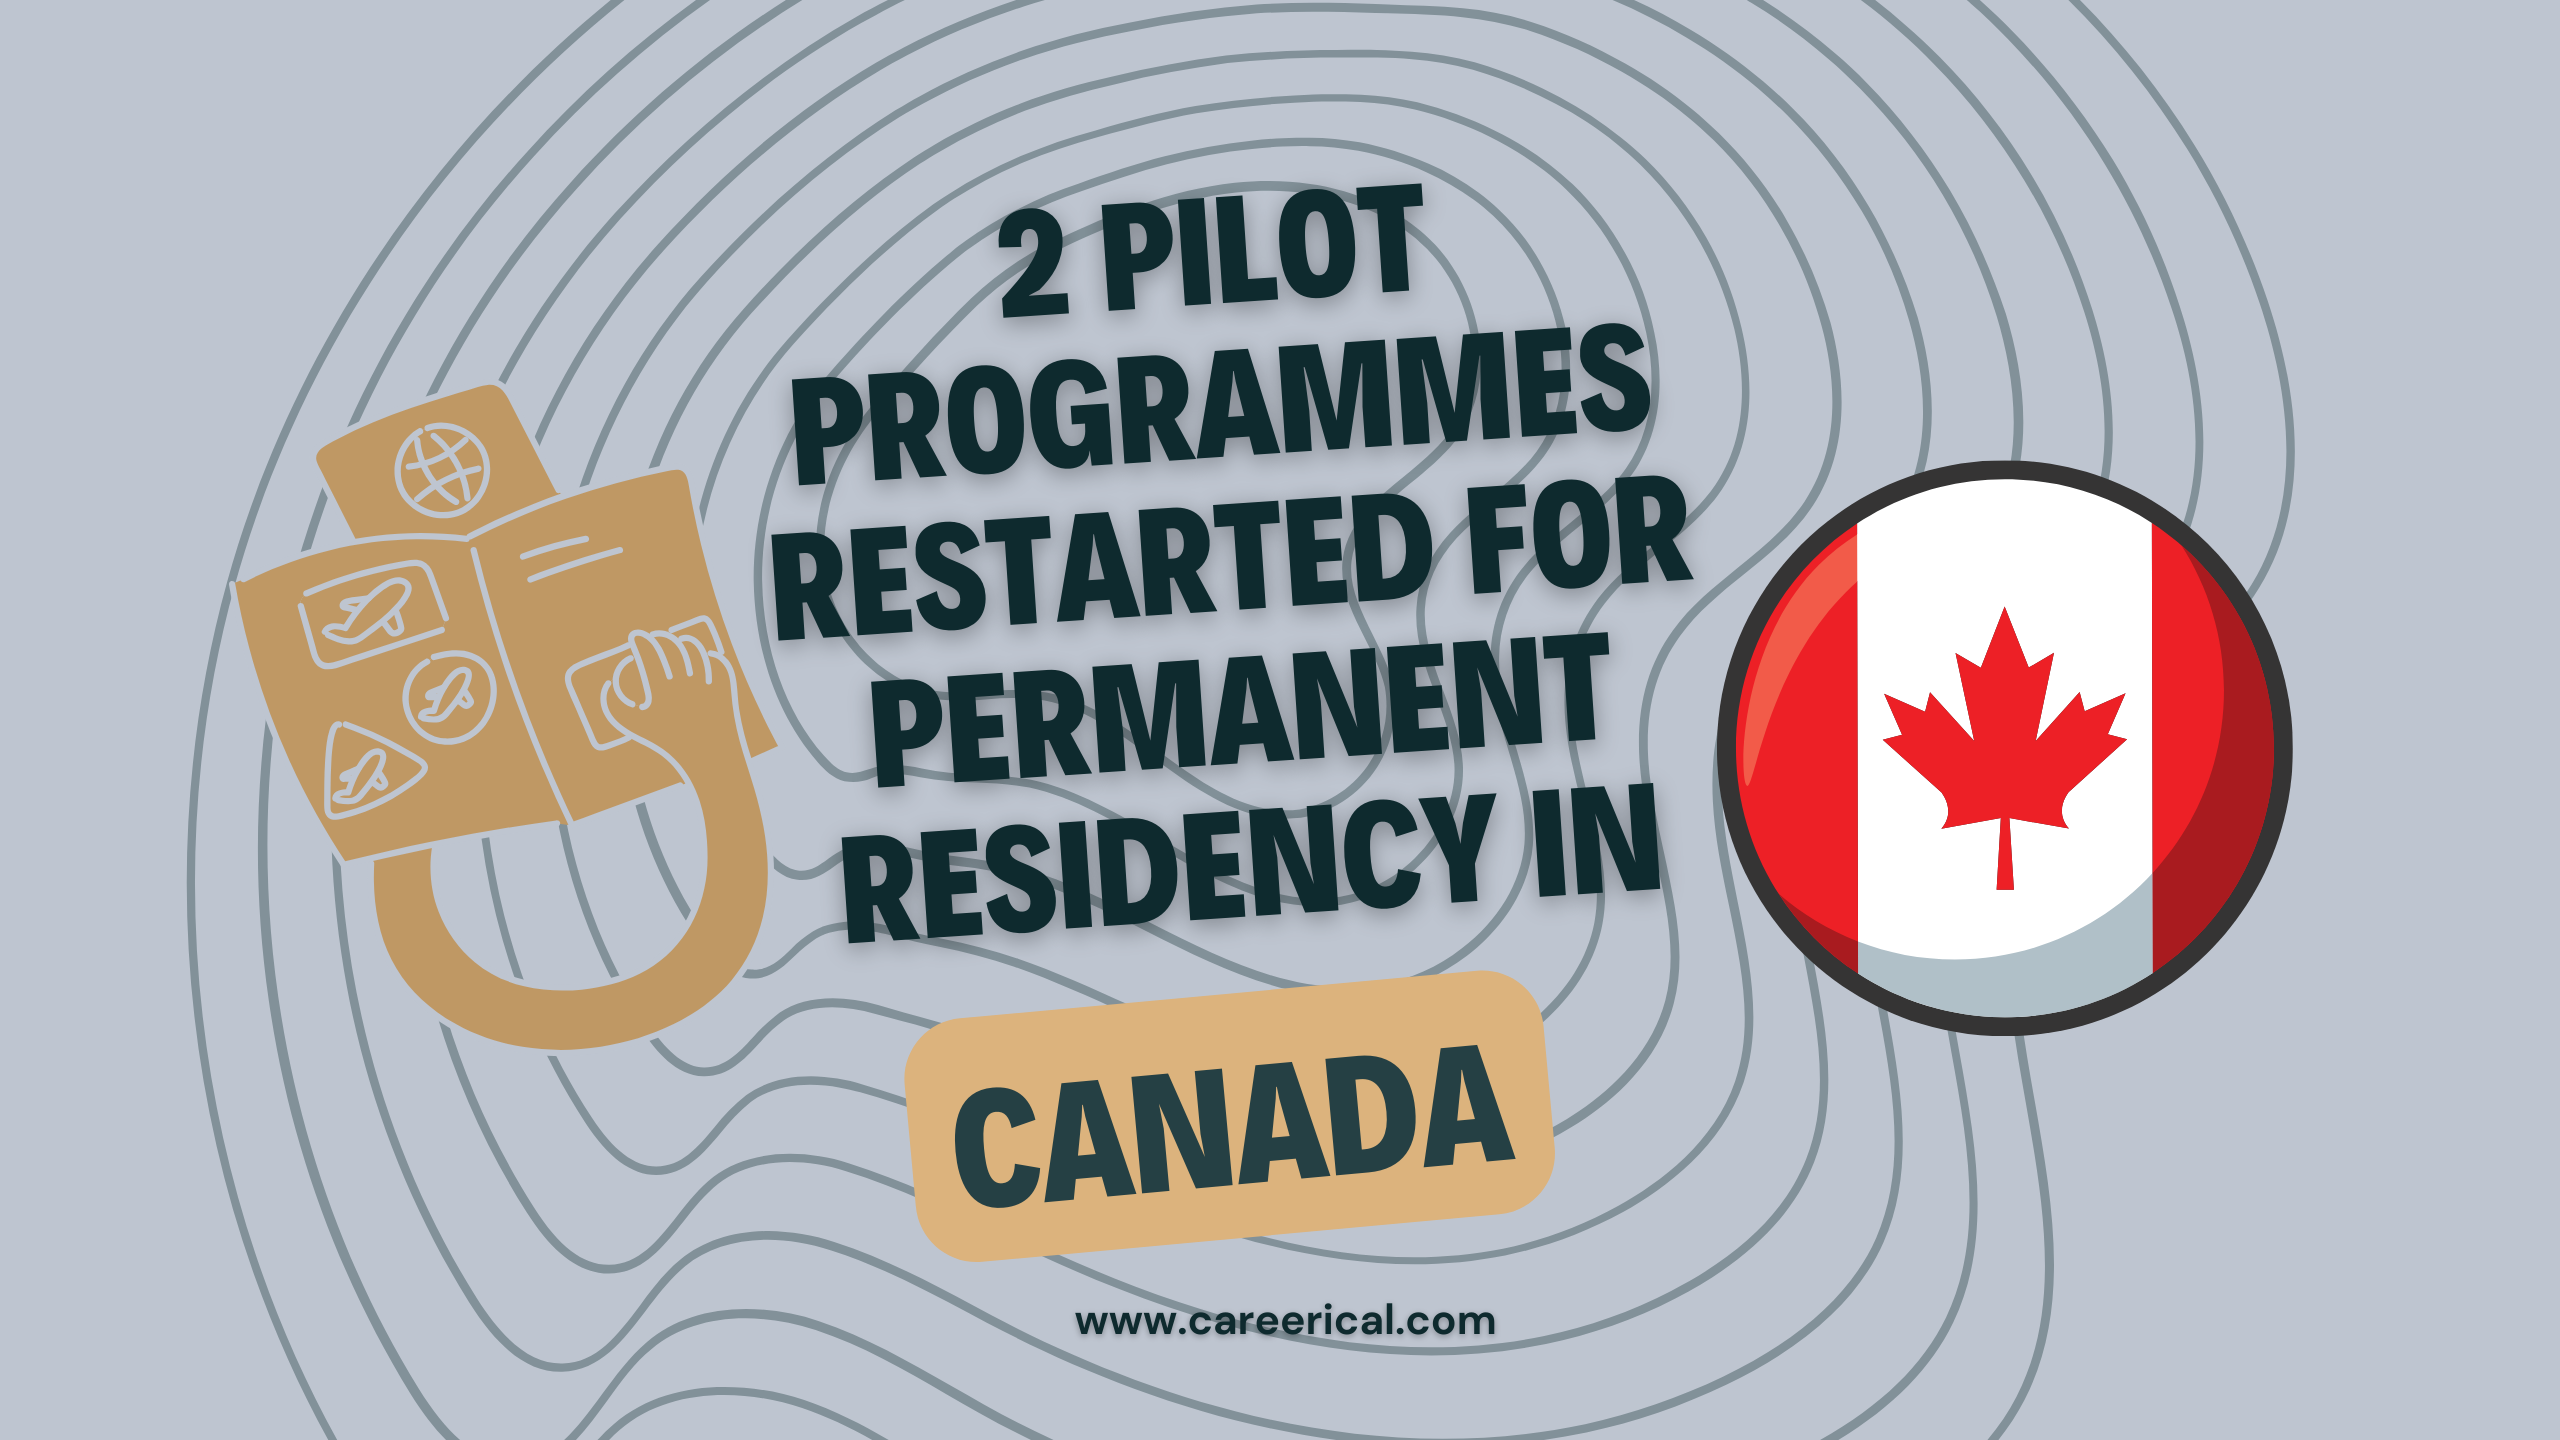 2 Pilot Programmes Restarted for Permanent Residency in Canada